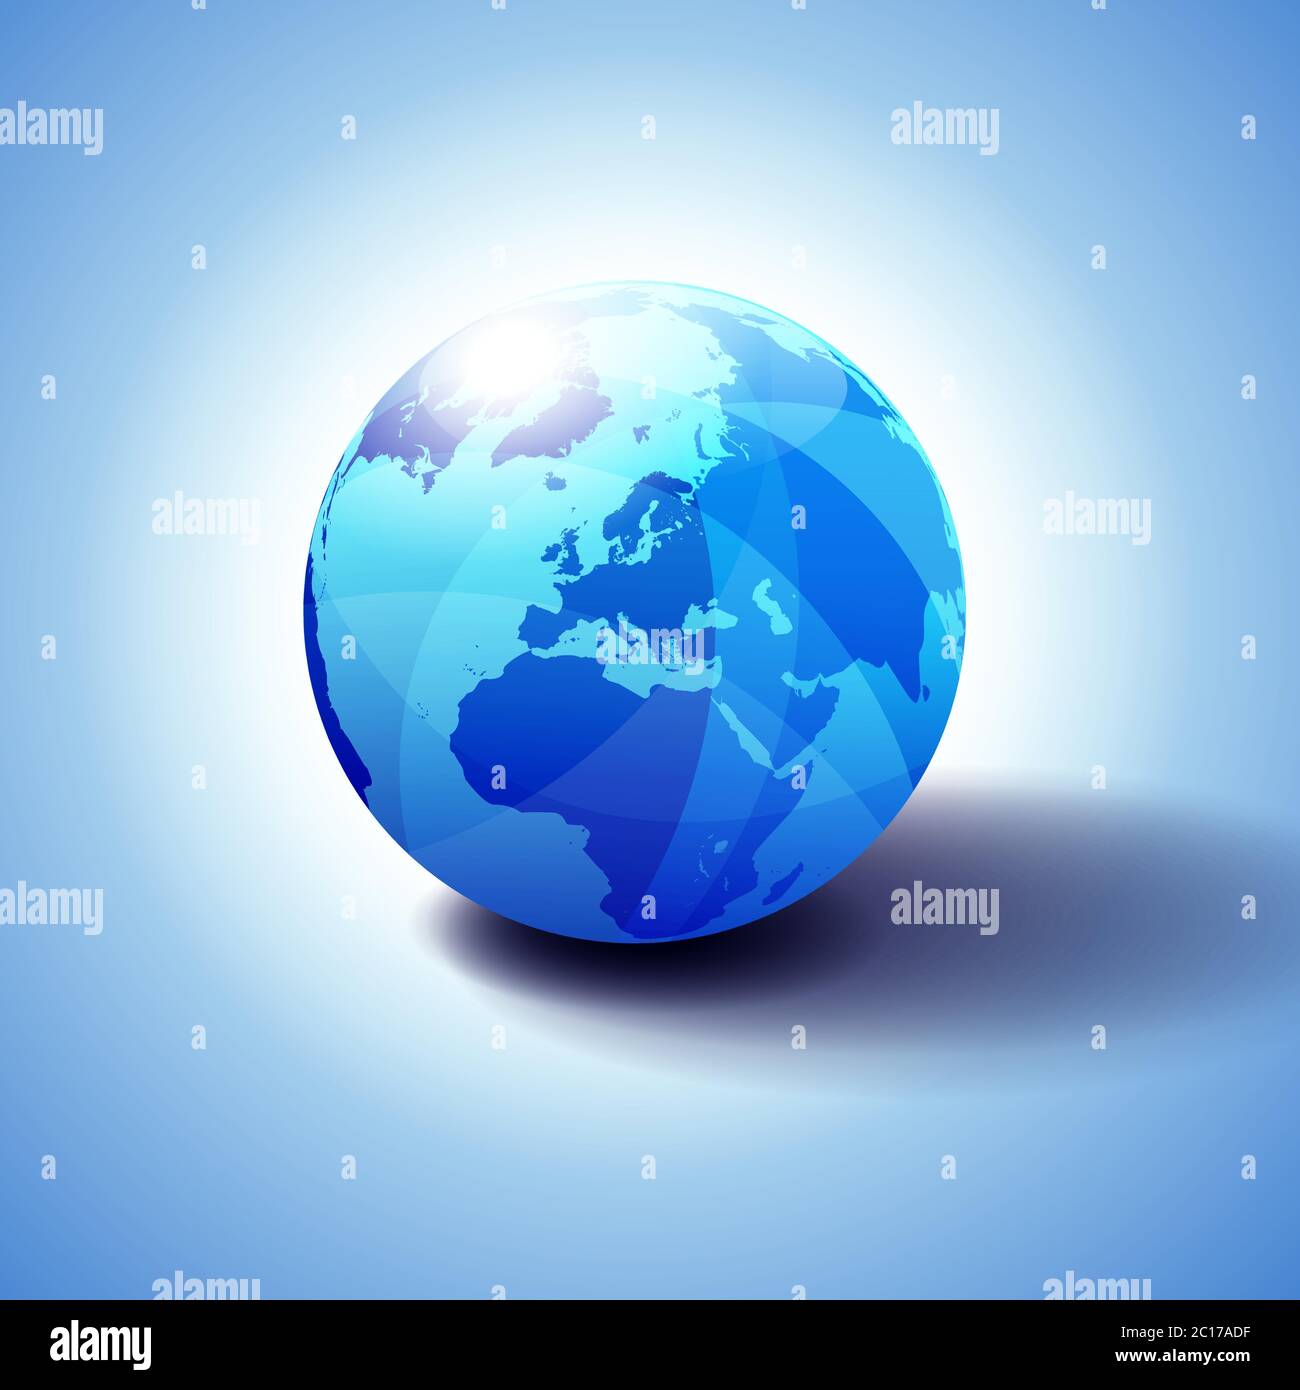 Europe, Middle East and Africa Background with Globe Icon 3D illustration, Glossy, Shiny Sphere with Global Map in Subtle Blues. Stock Vector